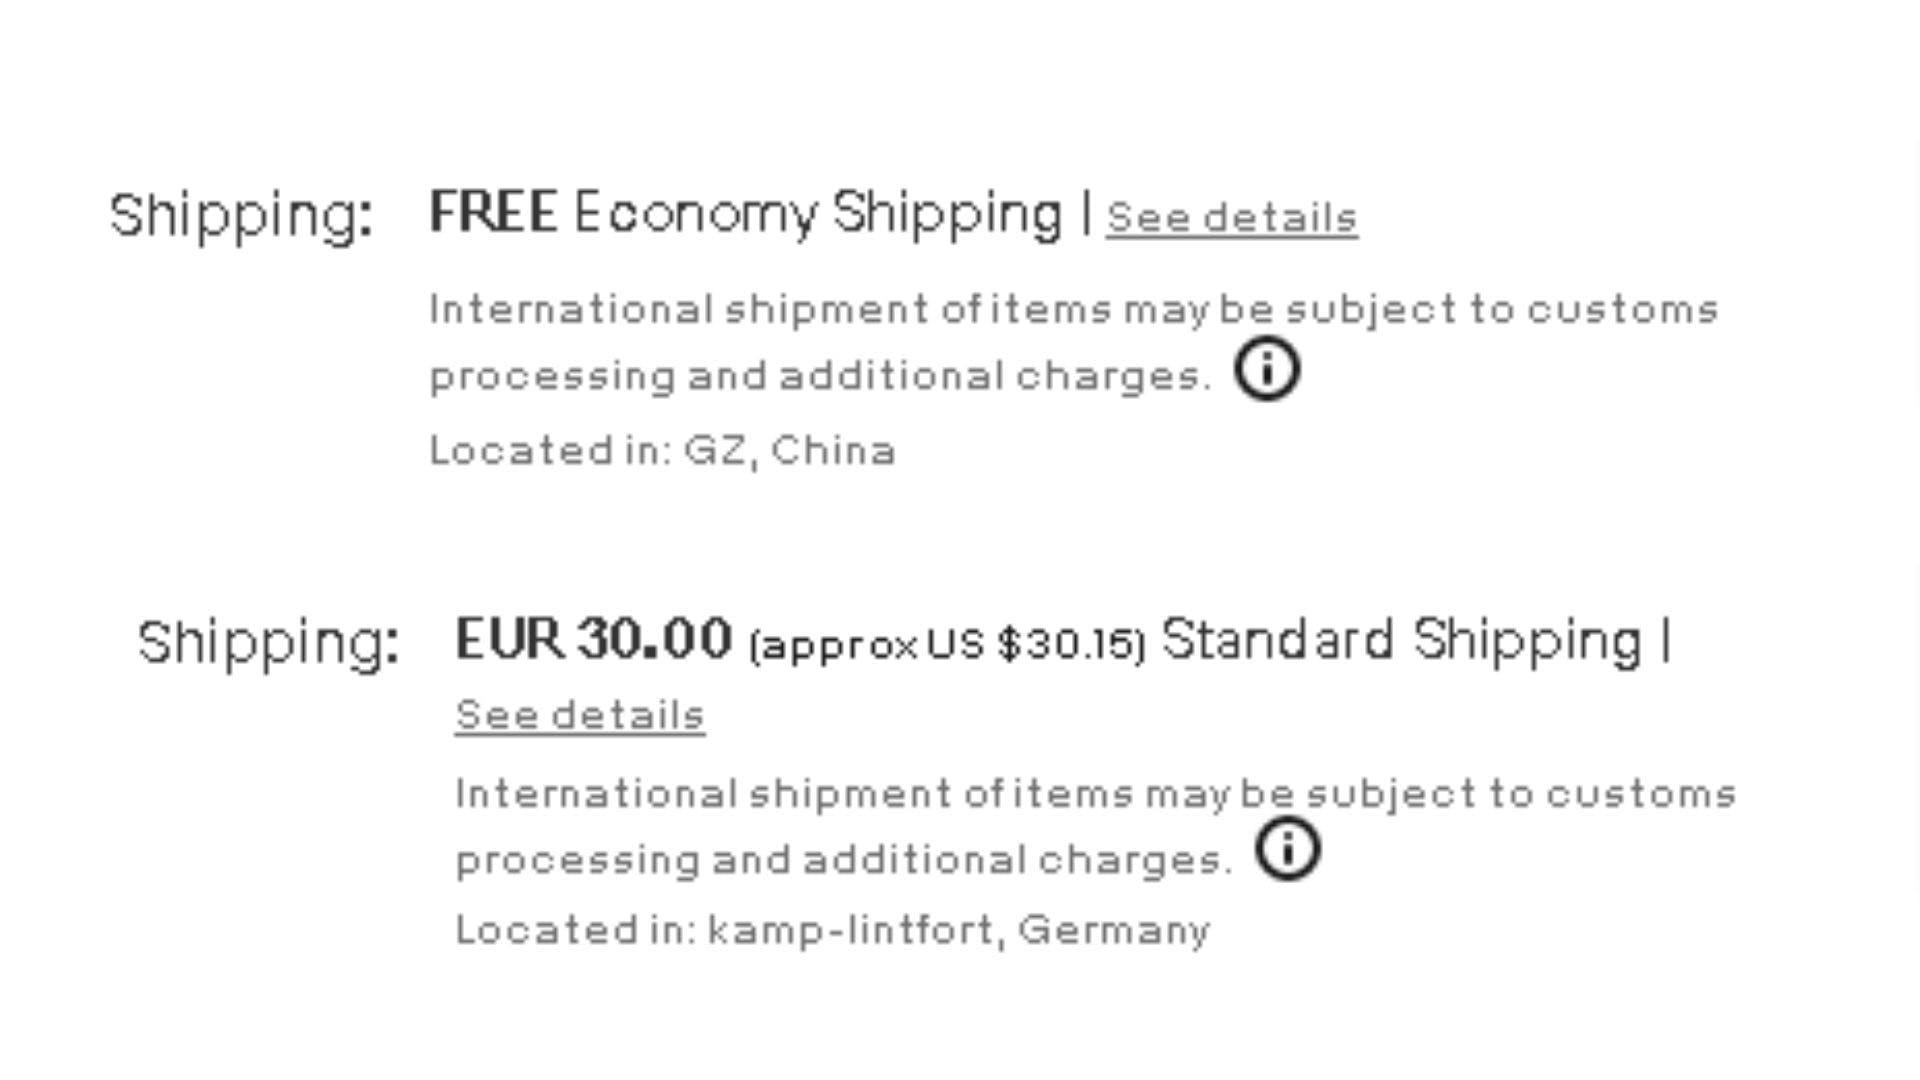 Shipping options from eBay